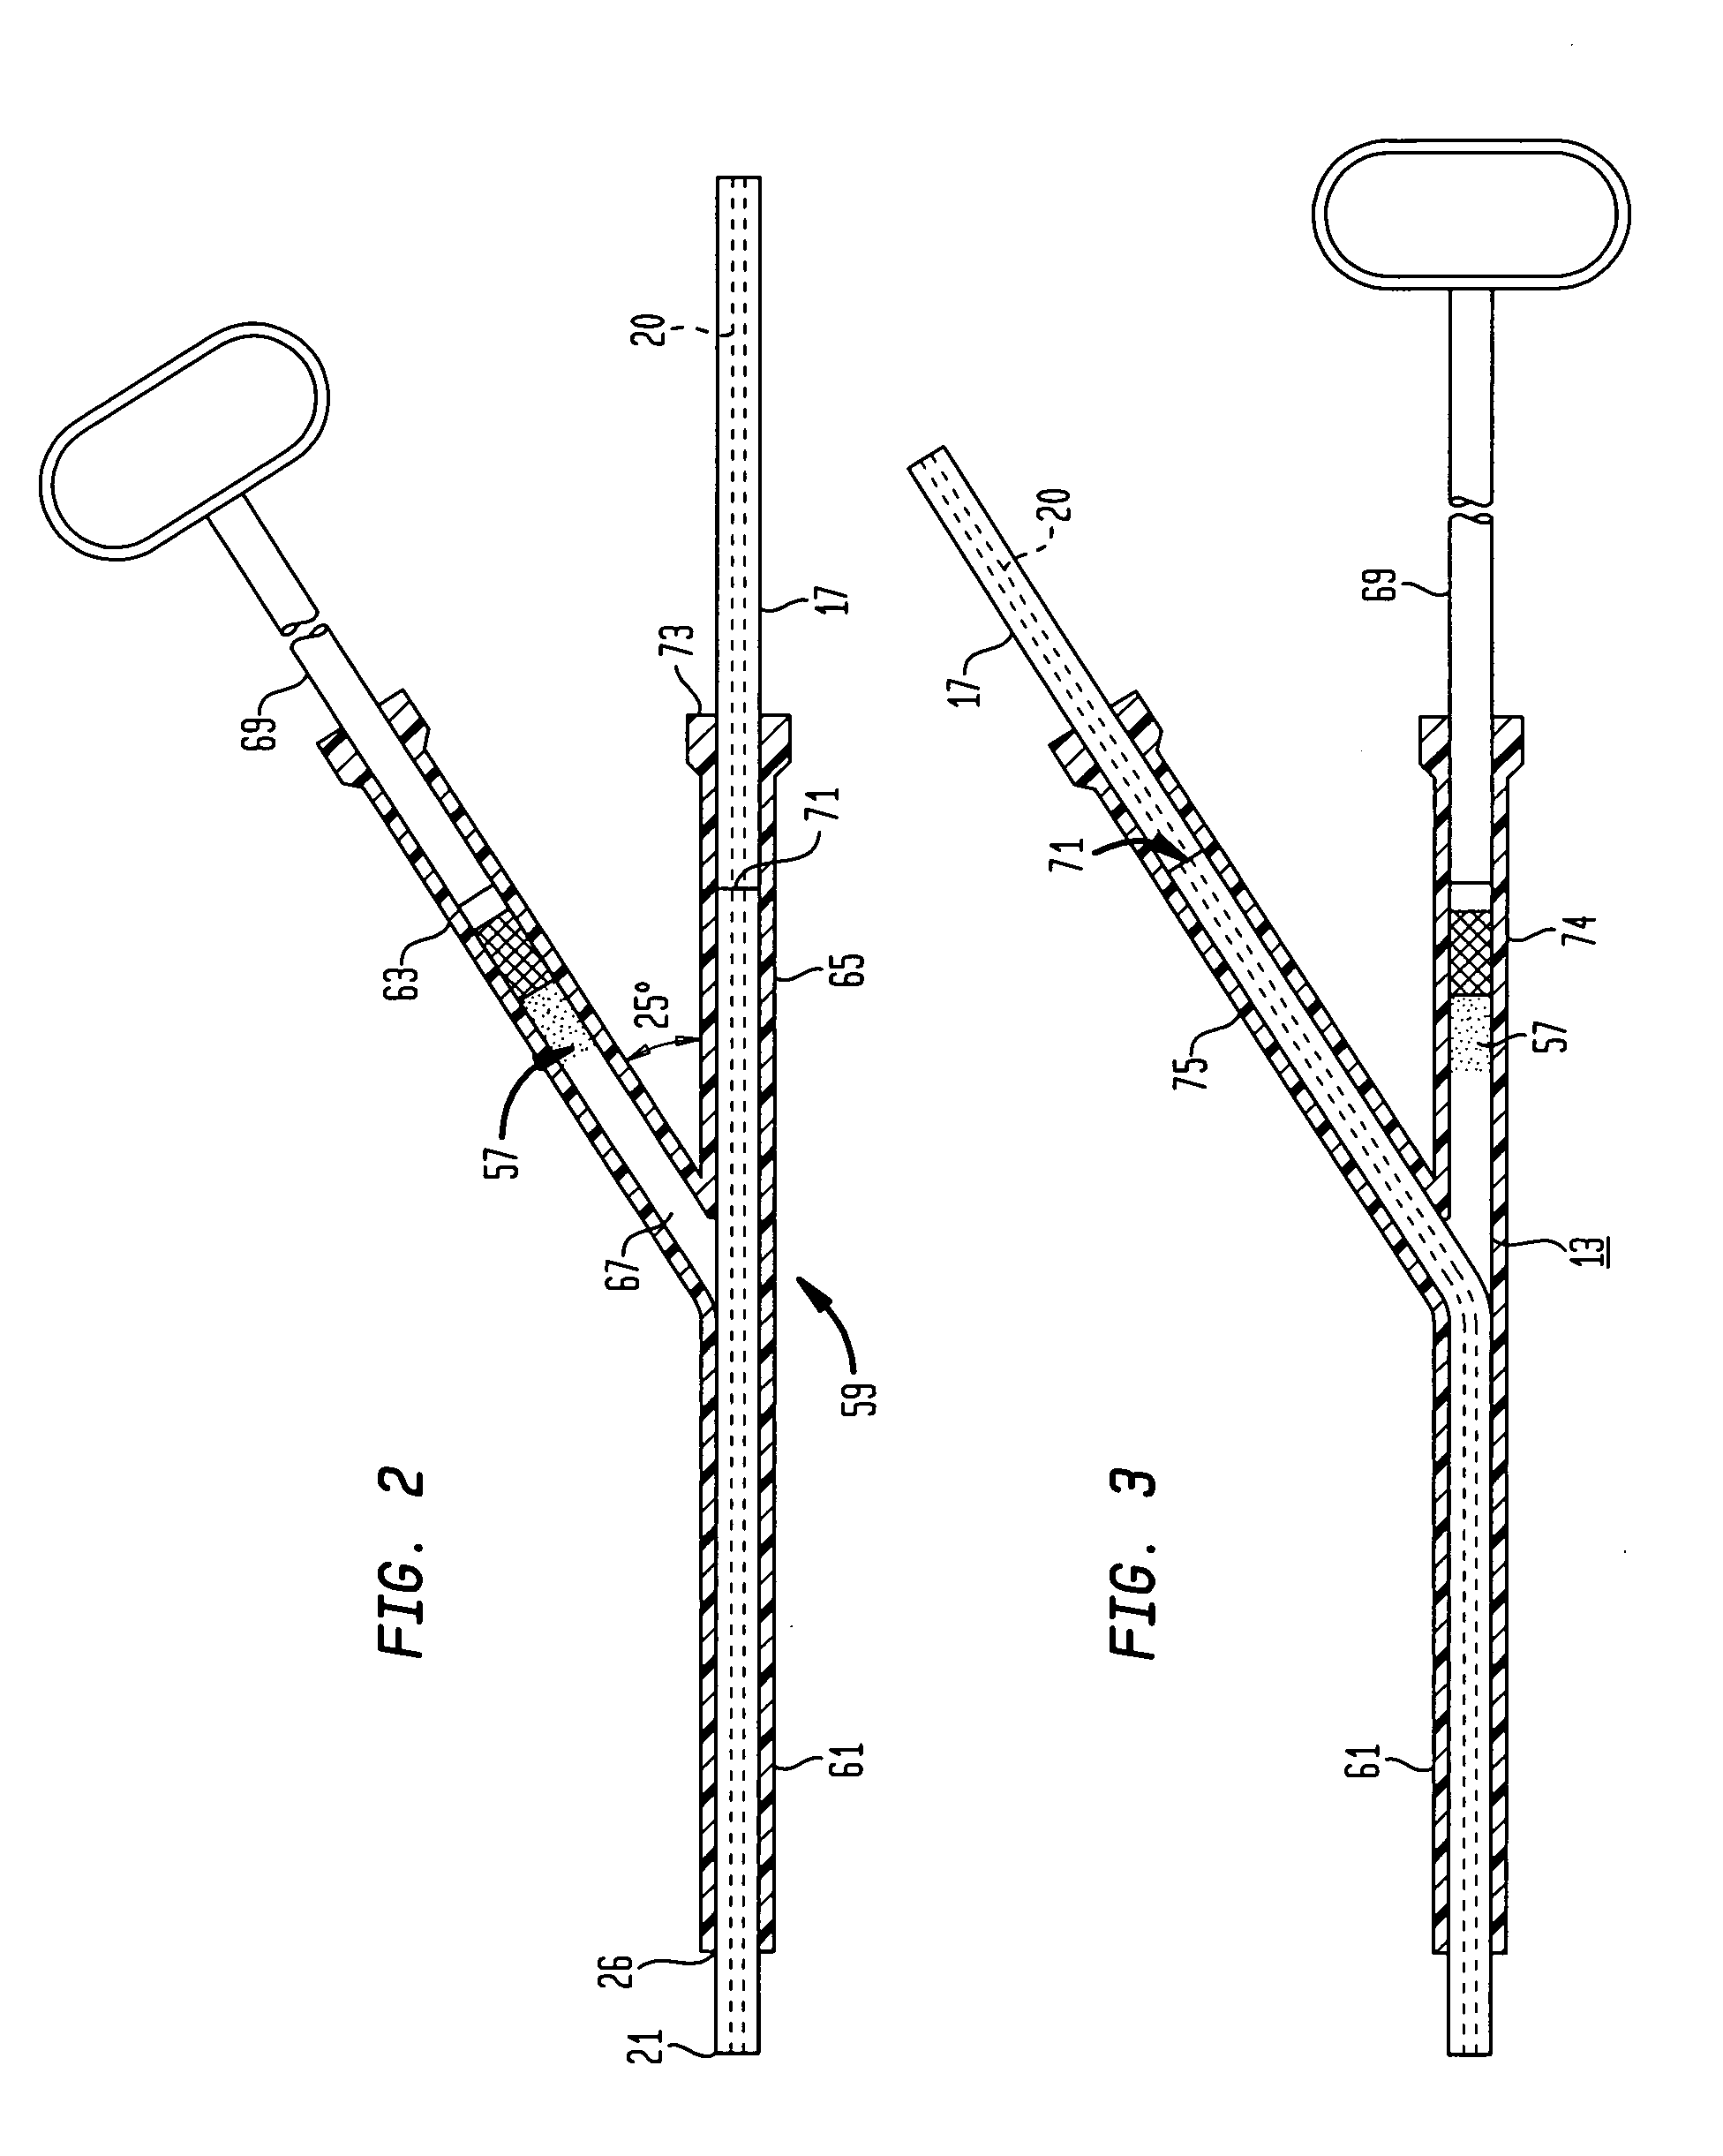 Device and method for sealing puncture wounds